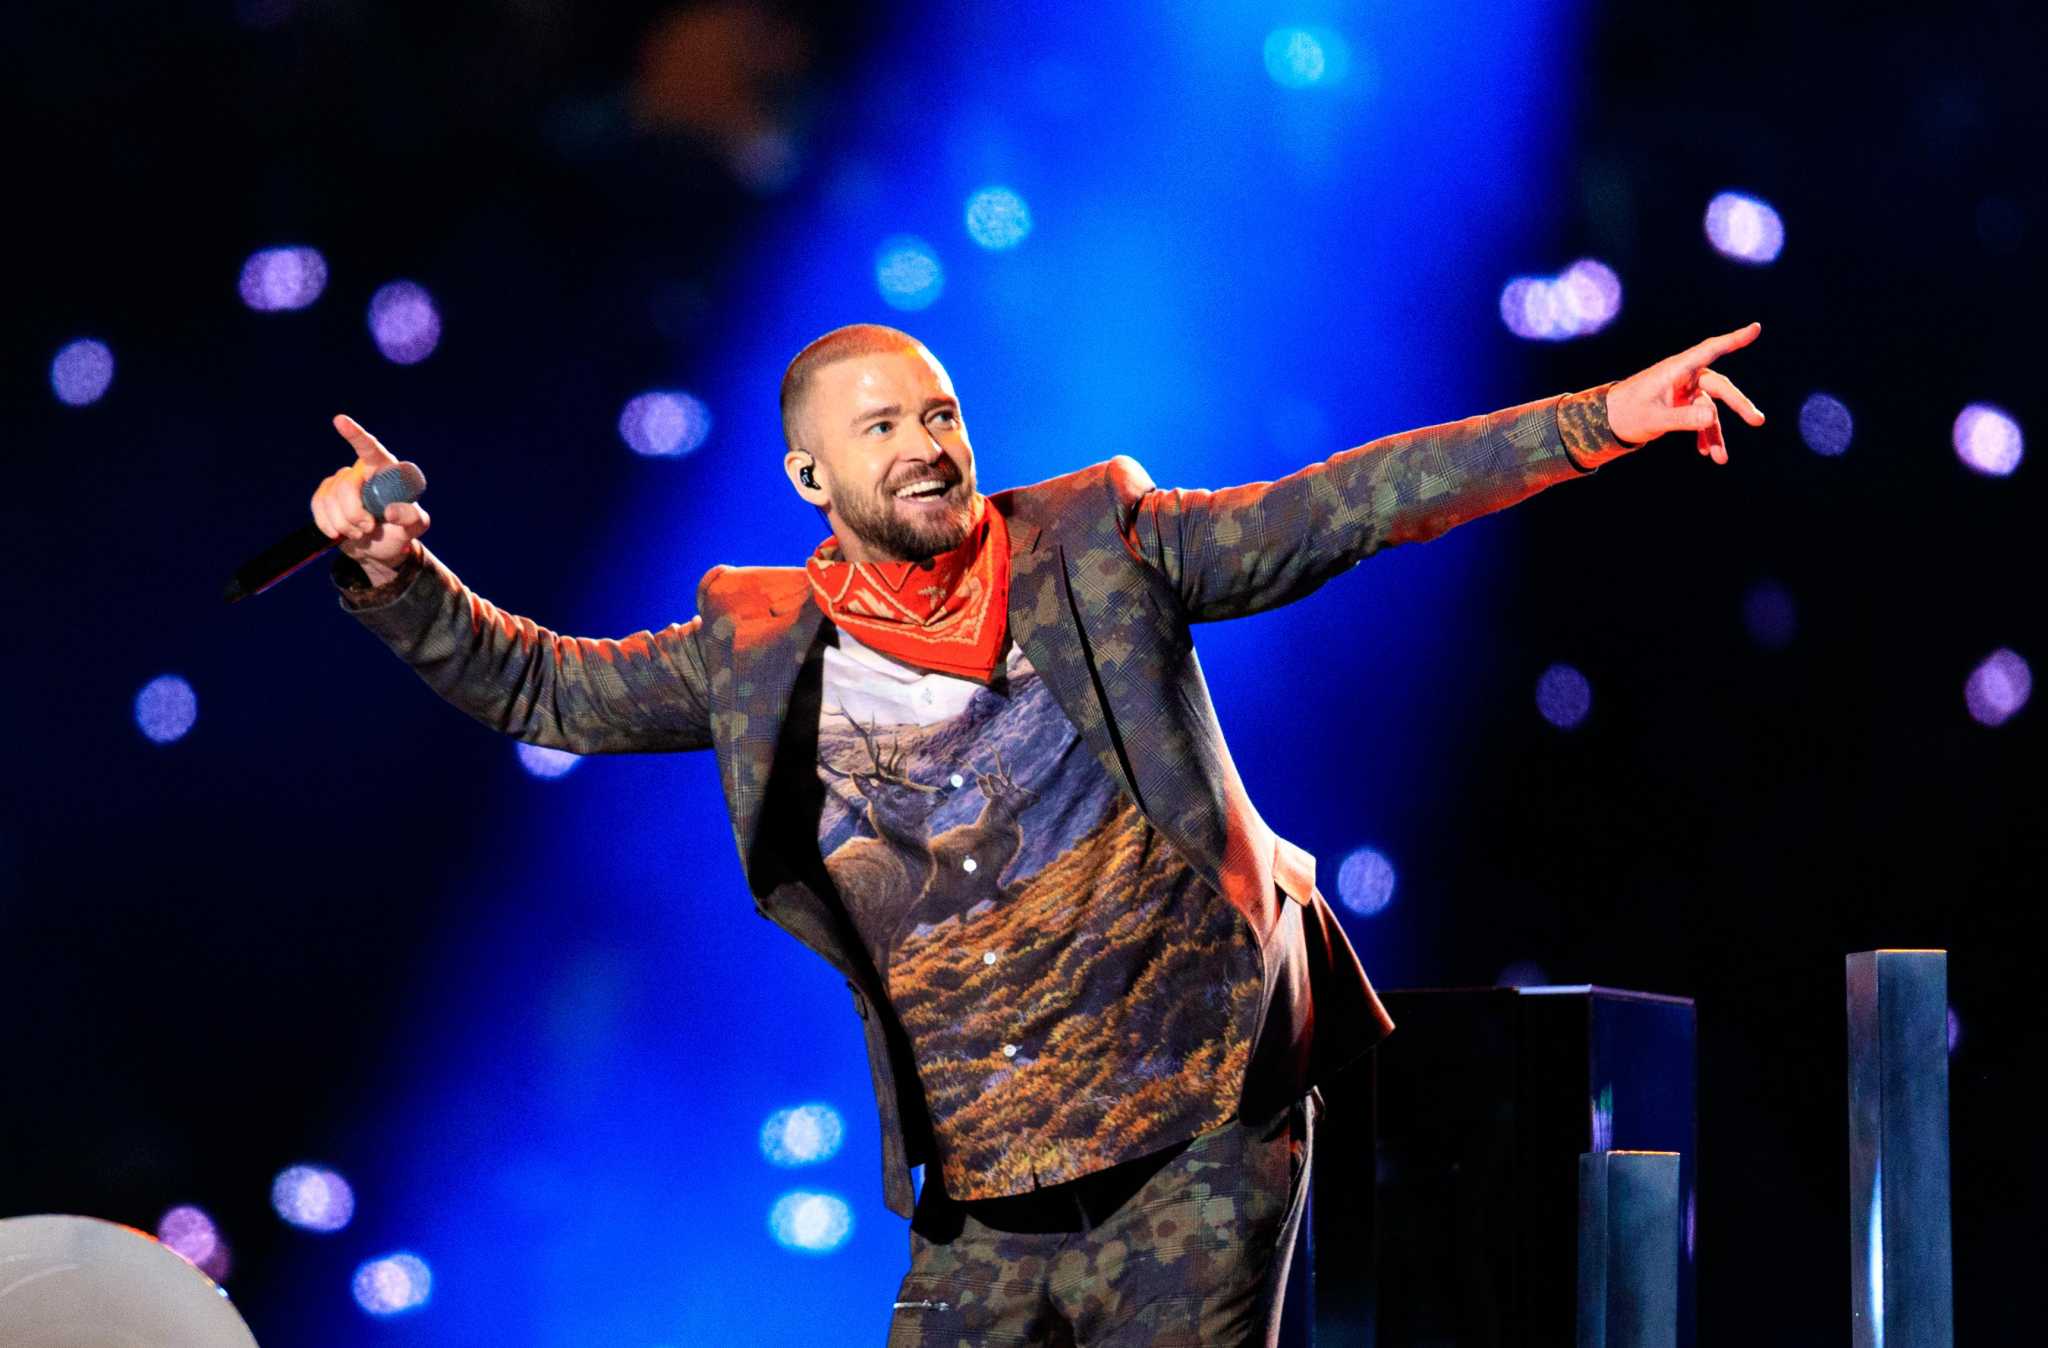 Justin Timberlake’s ‘Man of the Woods’ tour finally arrives in San Antonio